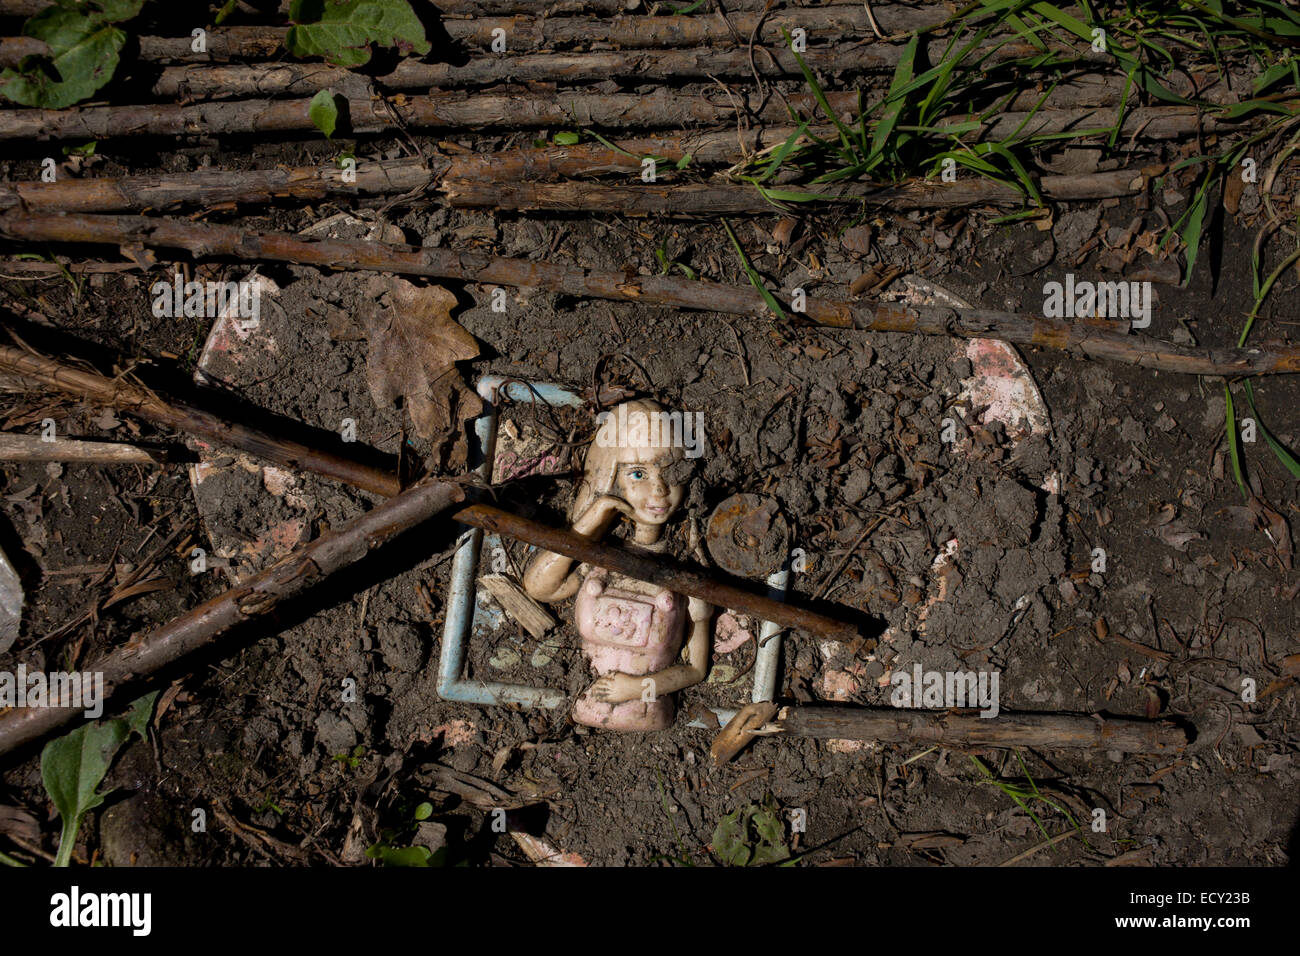 Doll trodden into soil in risk averse playground called The Land on Plas Madoc Estate, Ruabon, Wrexham, Wales. Stock Photo